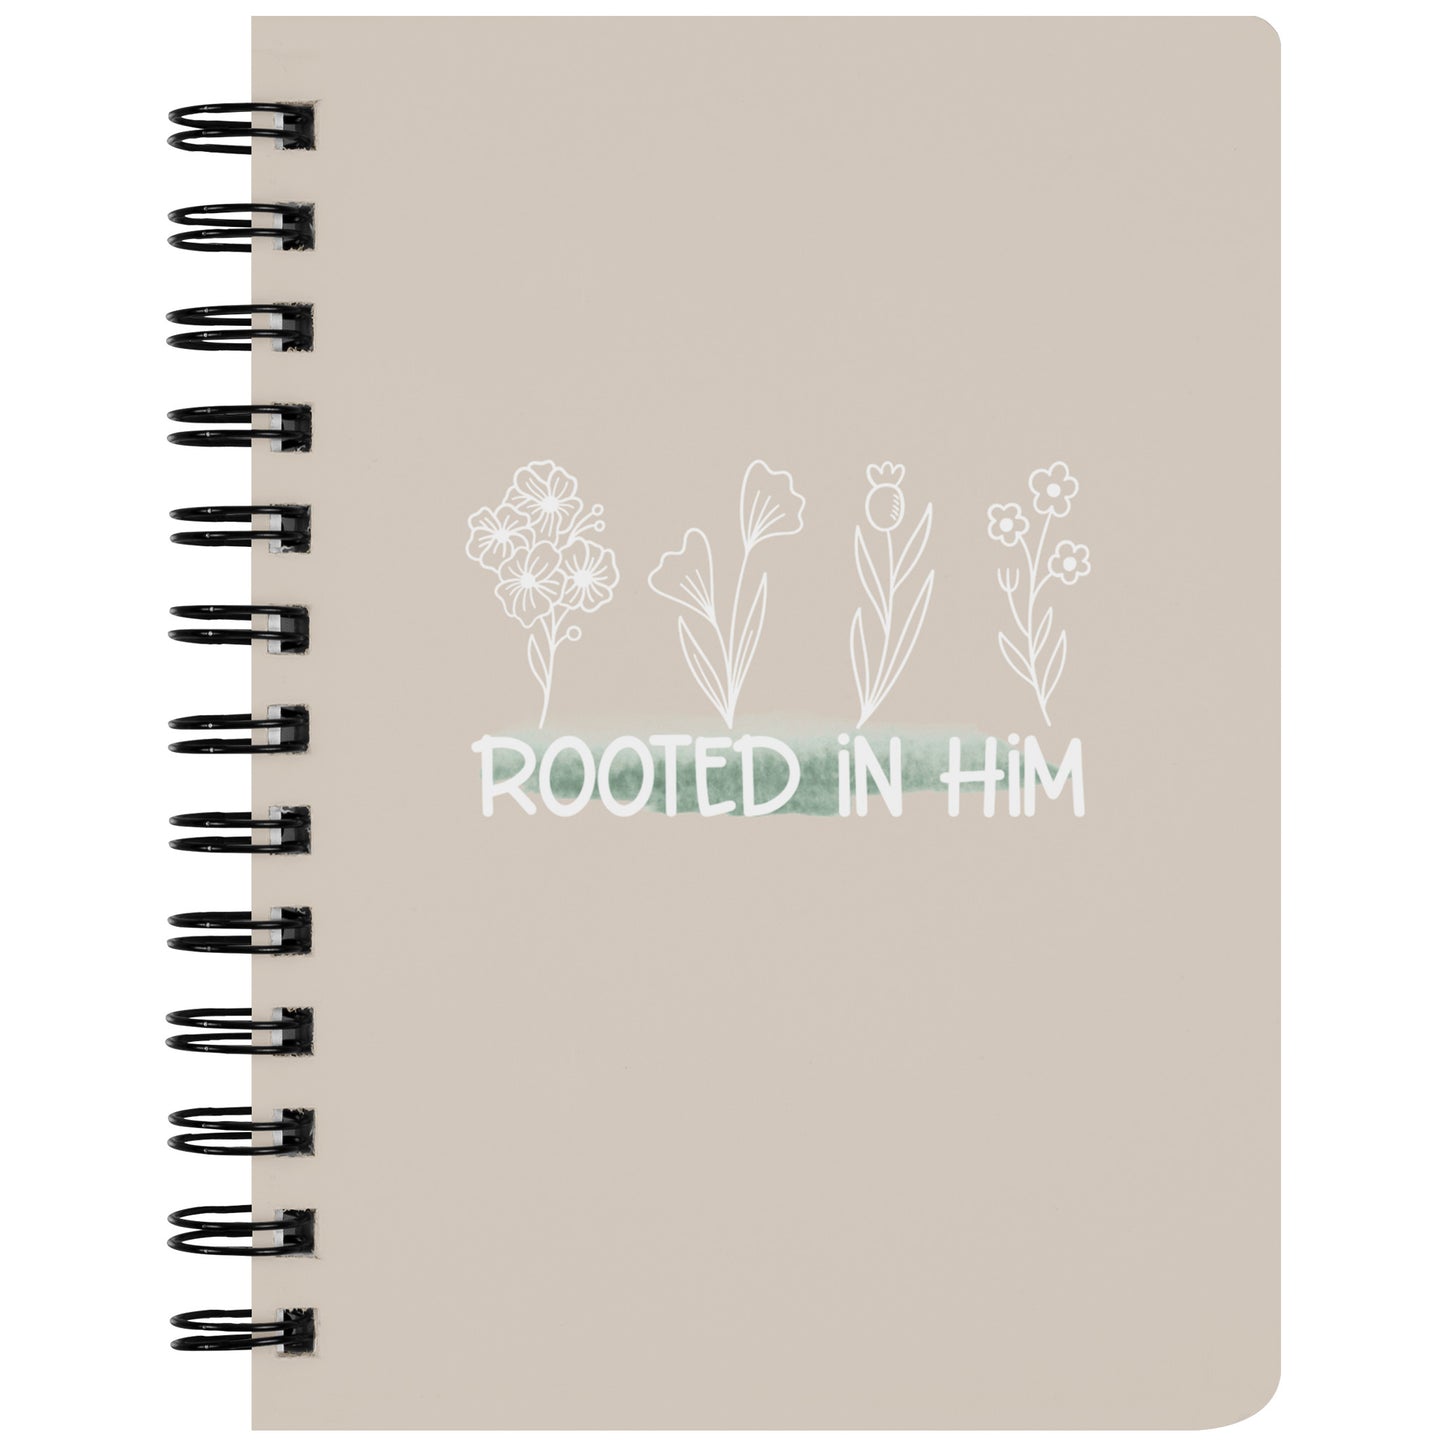 Rooted in Him Spiral Journal Notebook